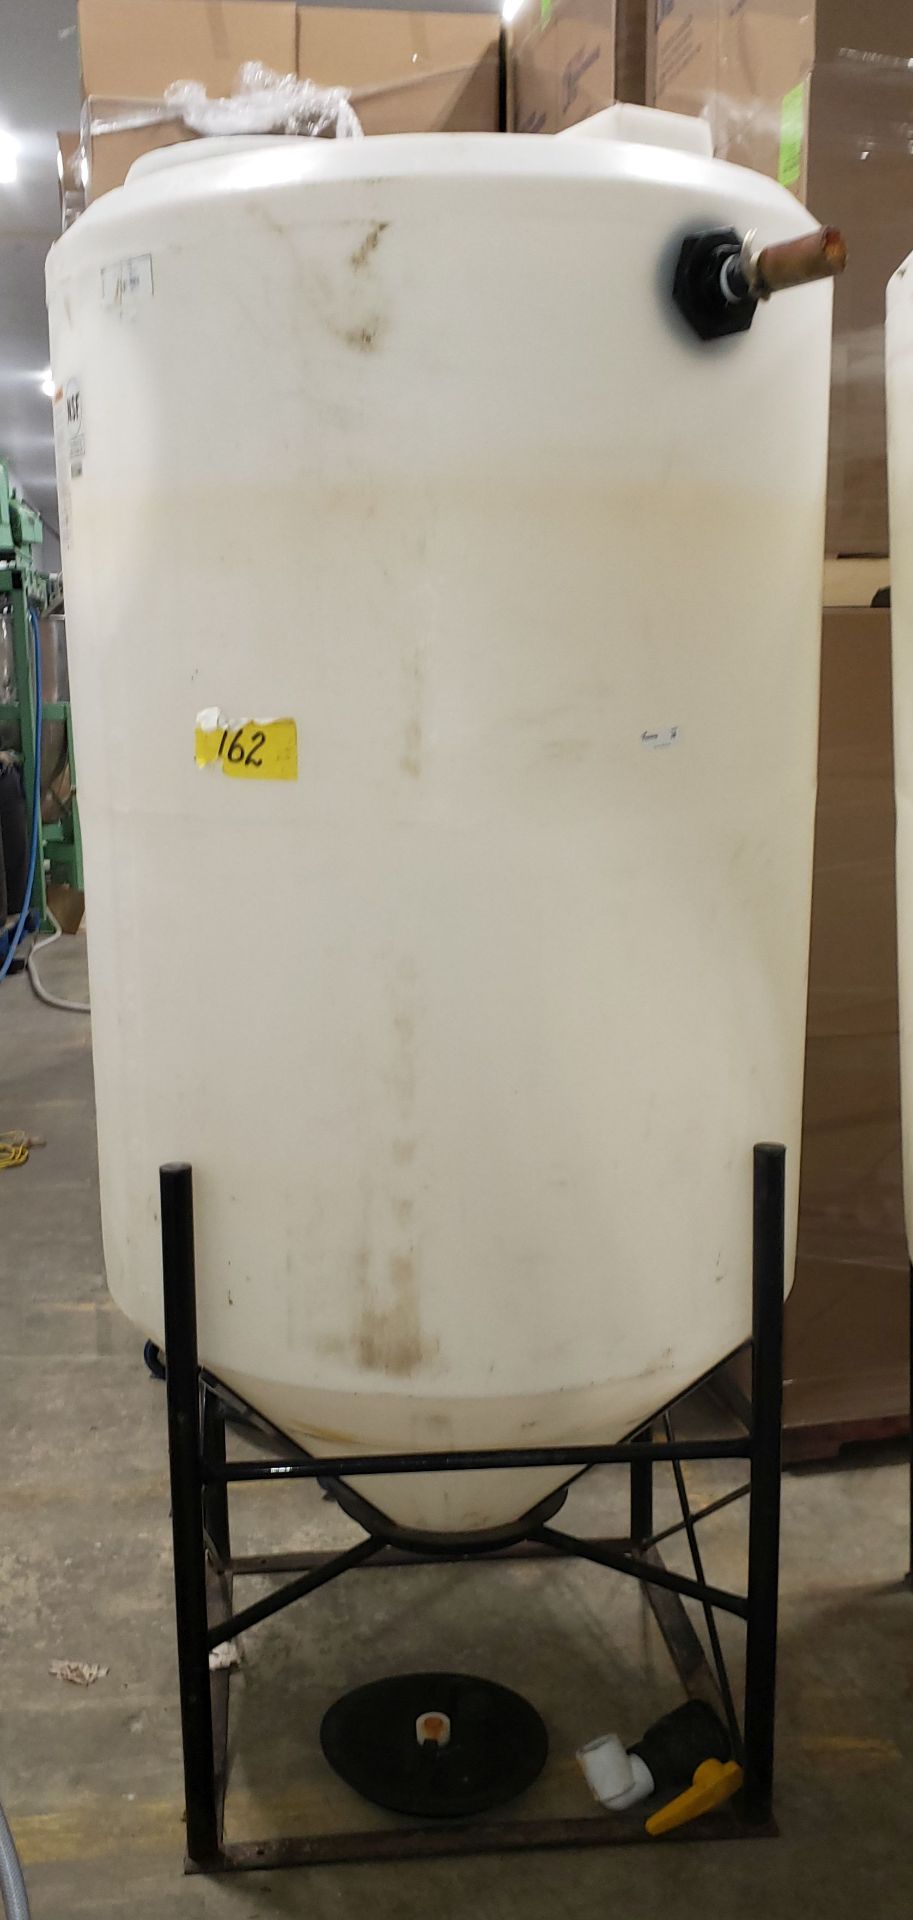 350 gallon pvc holding tanks with valve, lid and stand - Image 3 of 3